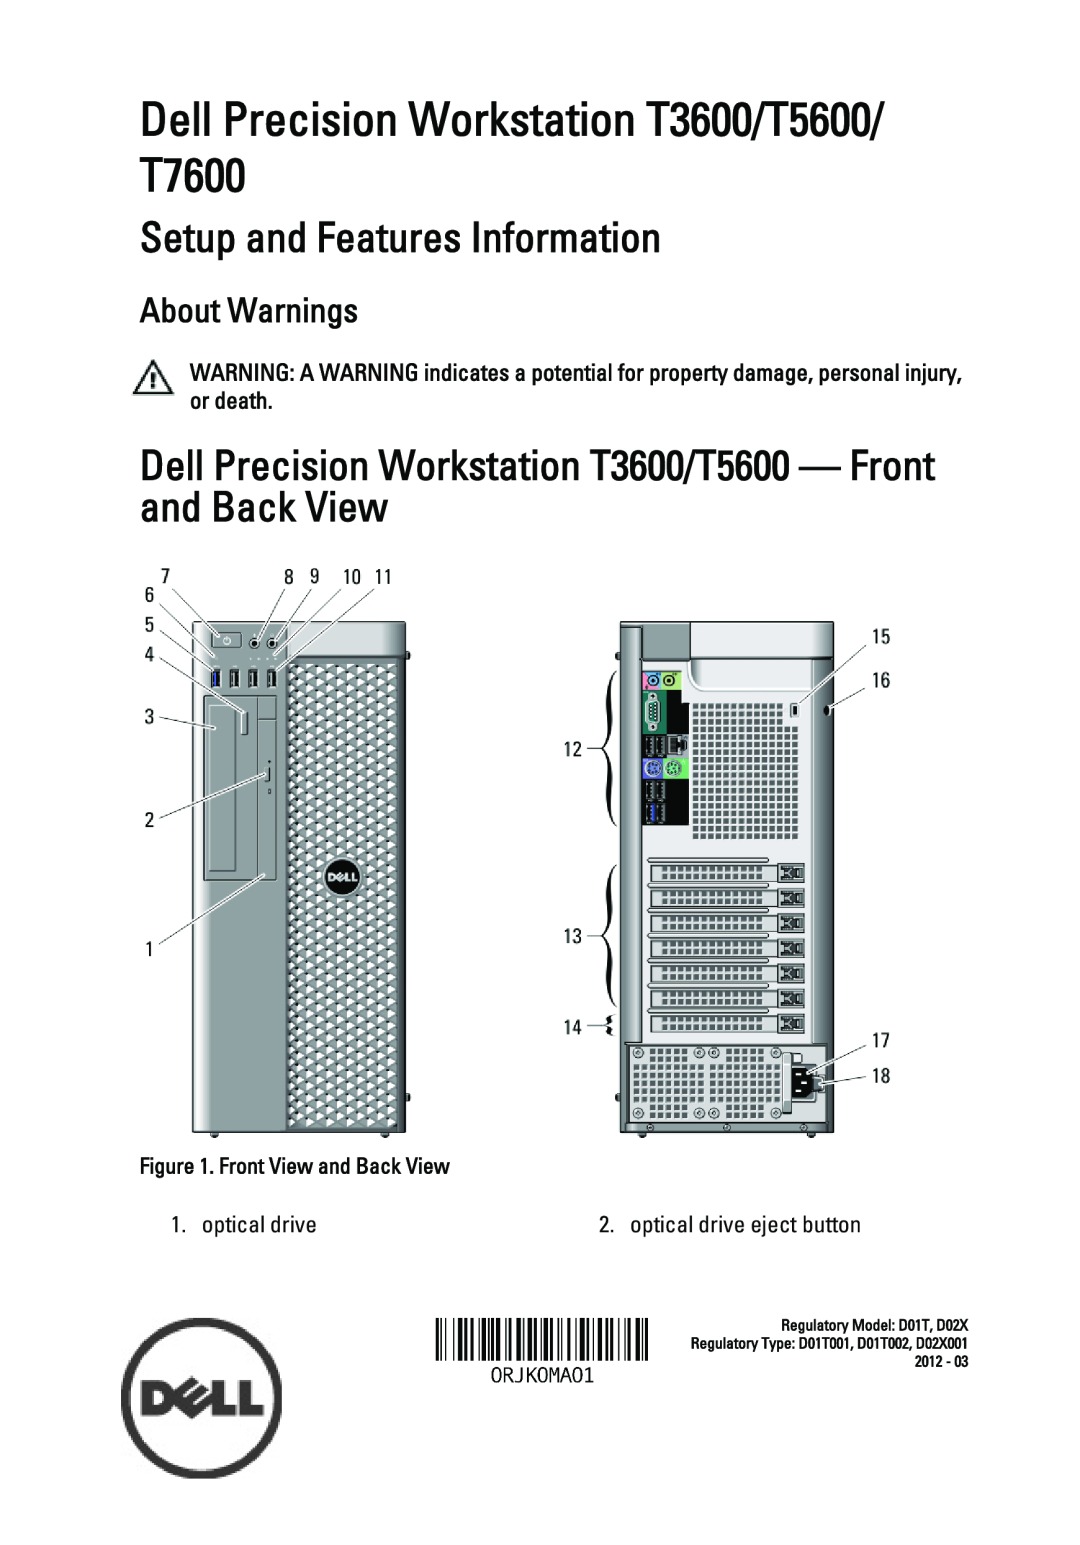 Dell manual Setup and Features Information, Dell Precision Workstation T3600/T5600 - Front and Back View, 2012 